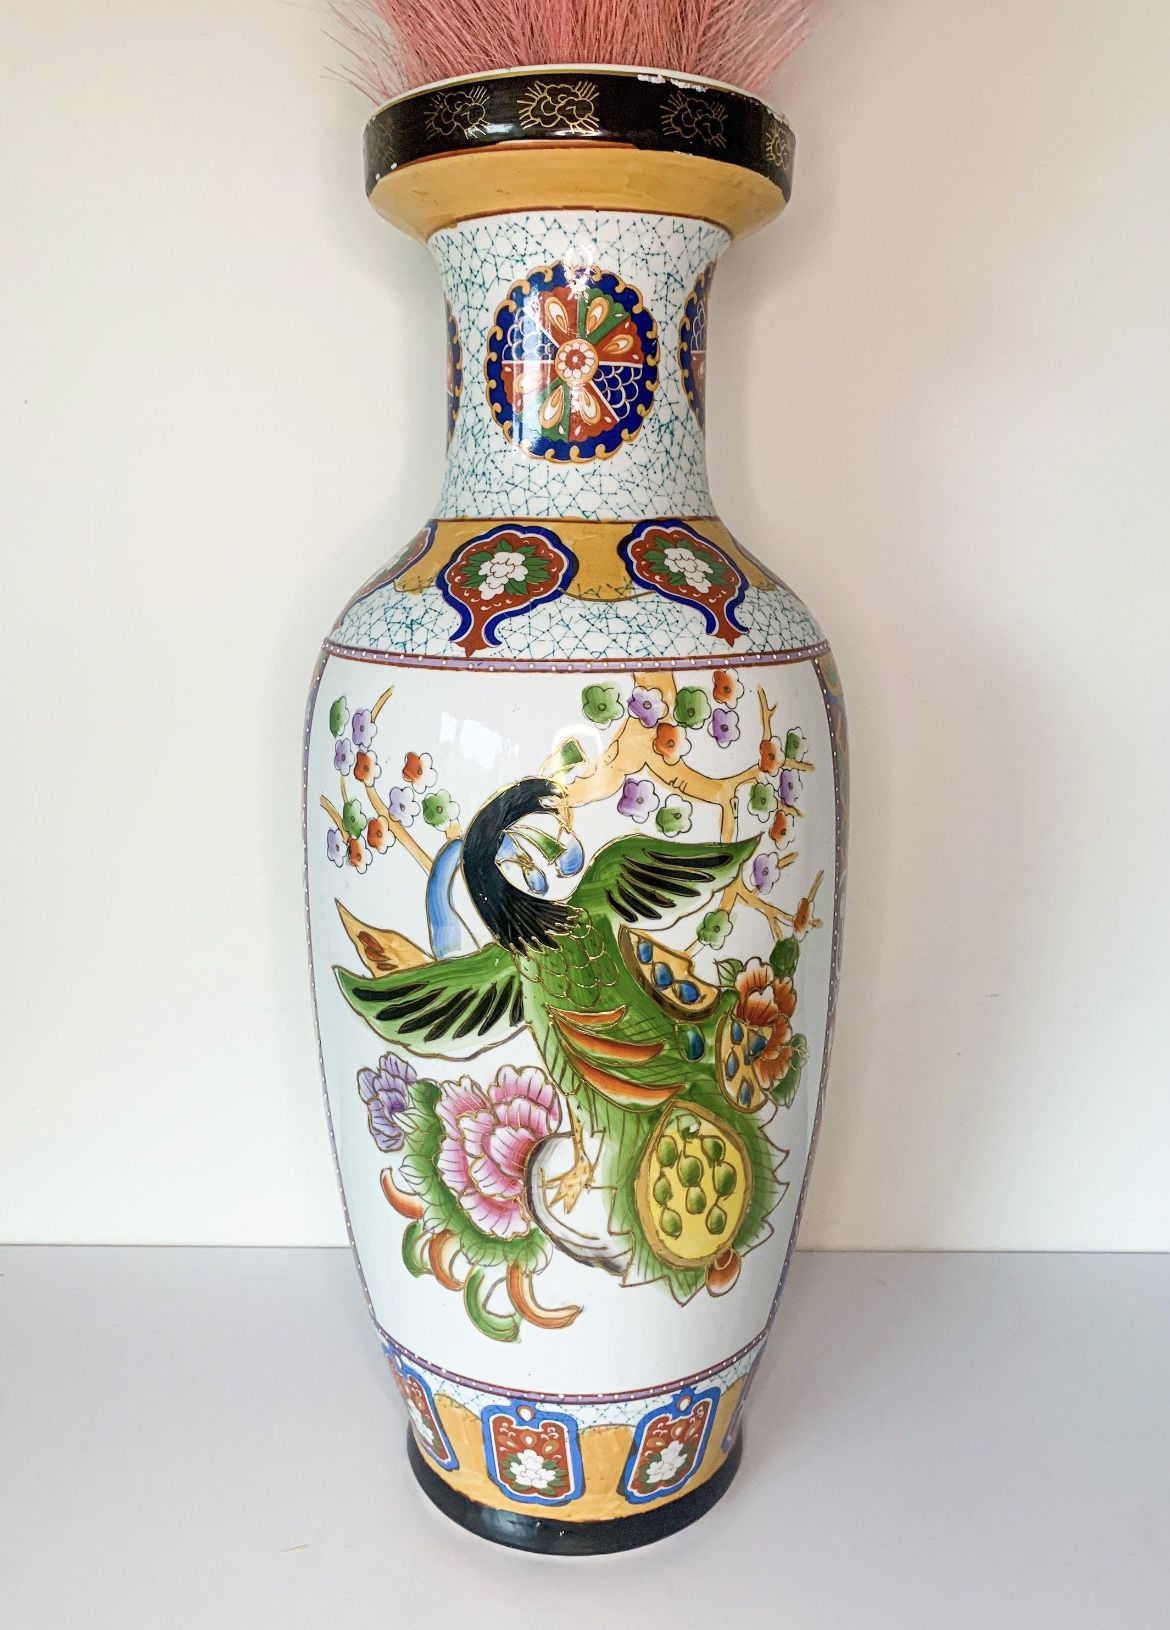 Large Japanese Ceramic Antique Floor Vase Flower Pot - Mid-century or Older - Bird Peacock Flowers  - 10 In Wide X 22 In Tall - EXCELLENT Condition!!